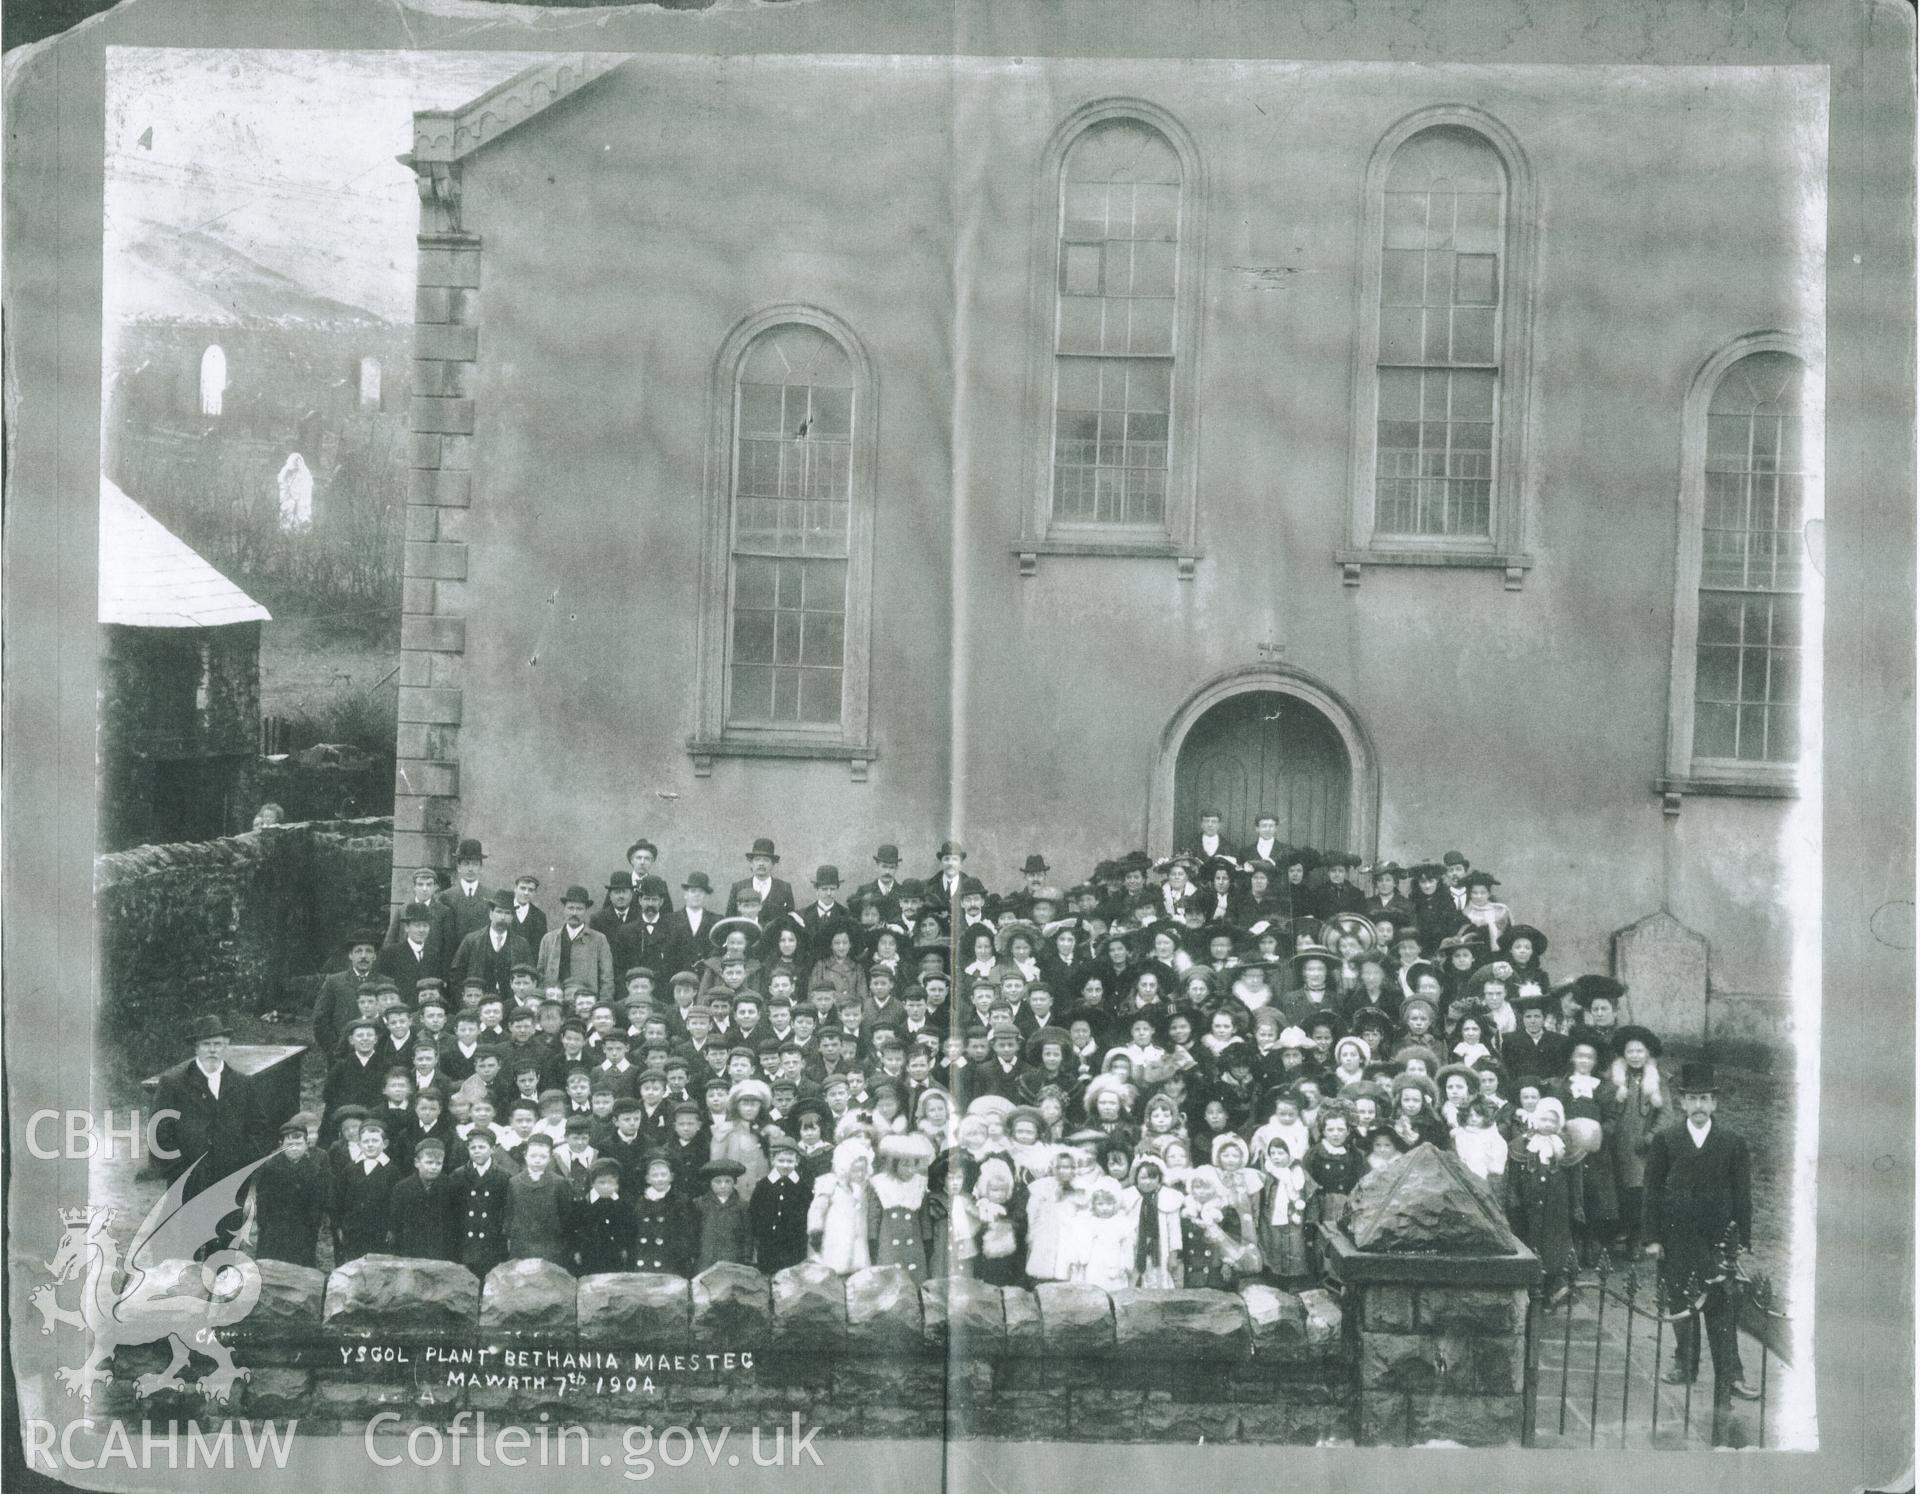 Black and white photograph of members of Ysgol Plant Bethania (Bethania Children's School), Maesteg, taken outside the front of the chapel. Donated to the RCAHMW by Cyril Philips as part of the Digital Dissent Project.